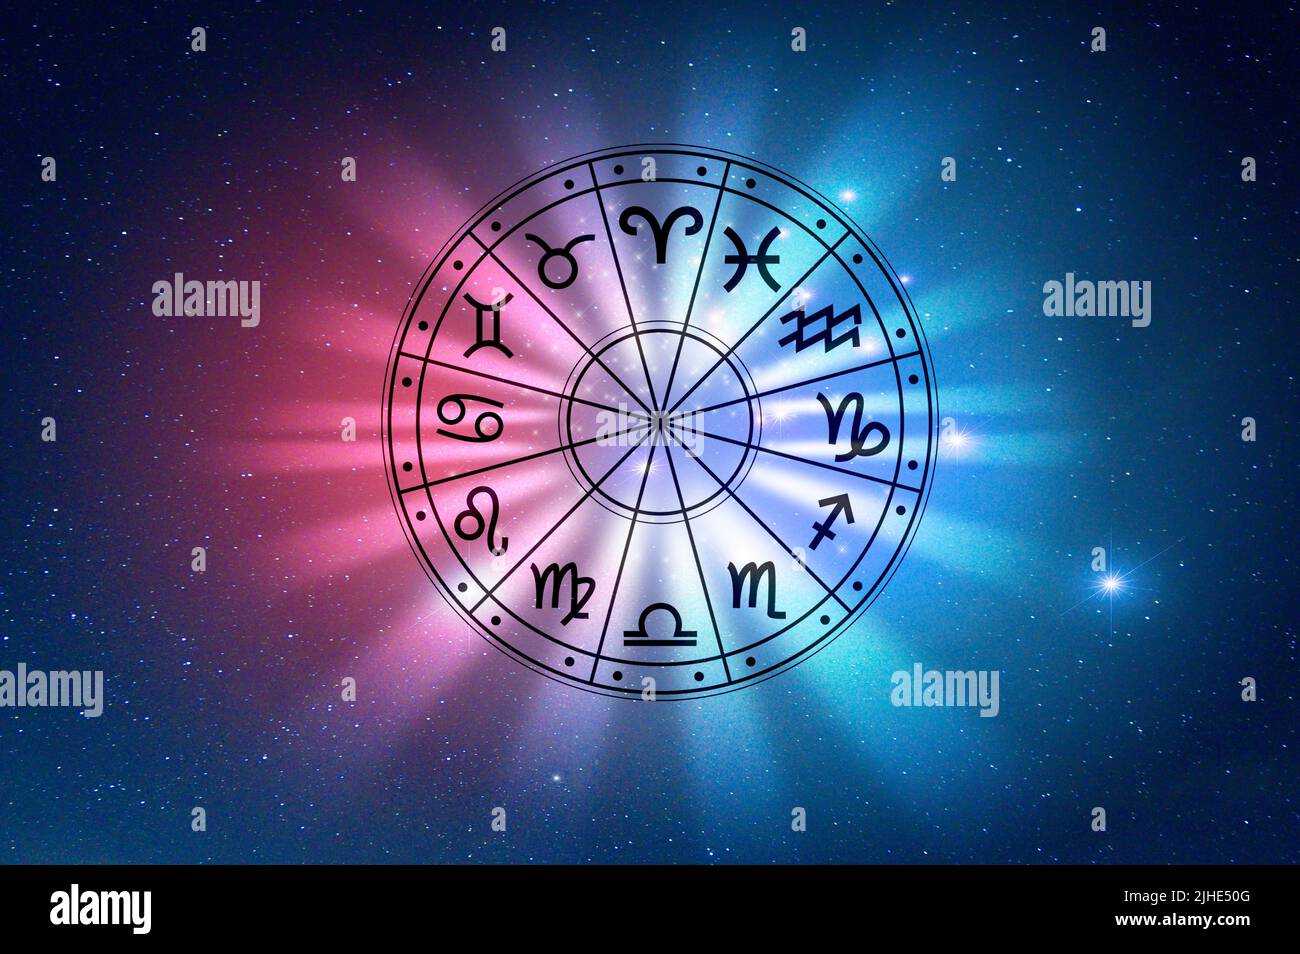 Zodiac signs inside of horoscope circle. Astrology in the sky with many stars and moons  astrology and horoscopes concept Stock Photo